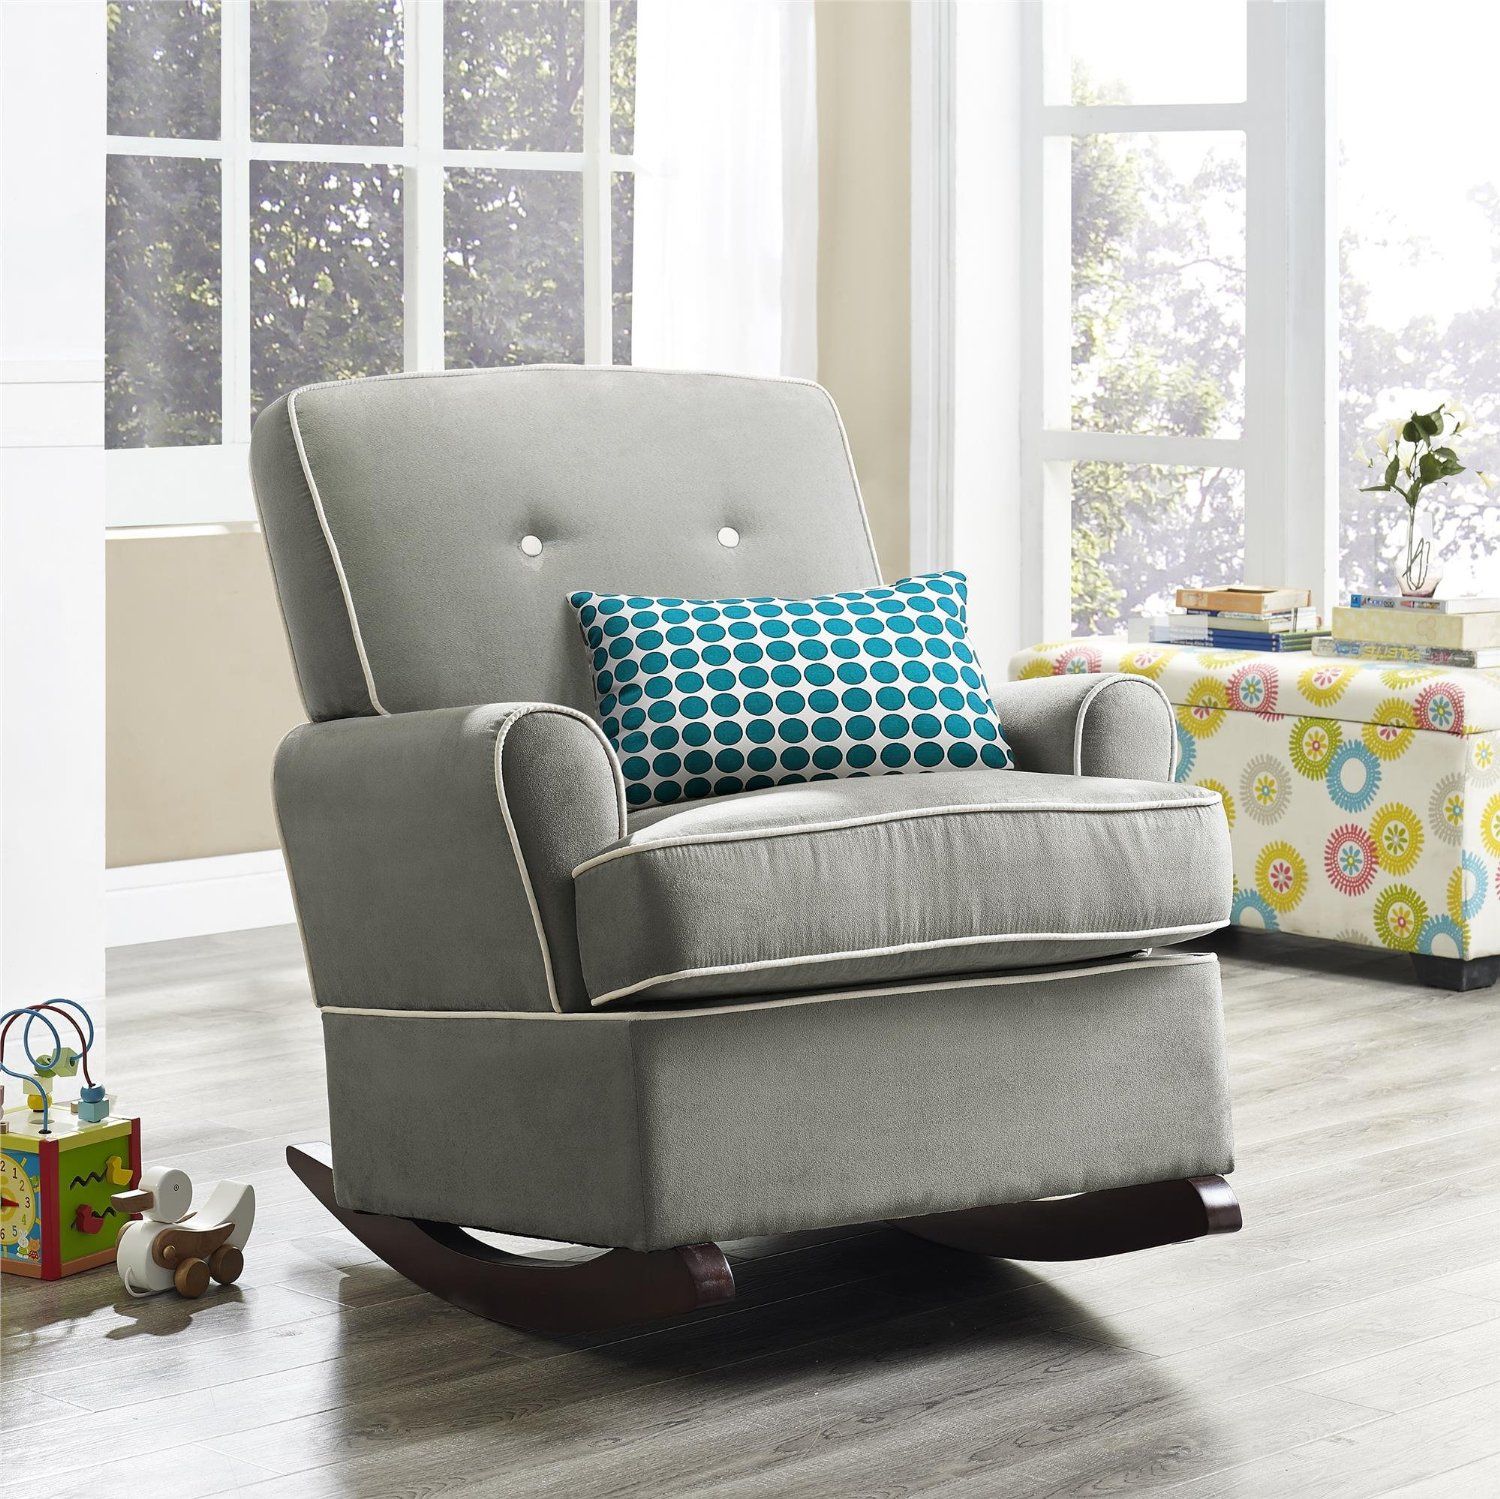 The Best Upholstered Rocking Chair 2018 | Best Rocking Chairs Intended For Padded Rocking Chairs (View 9 of 20)